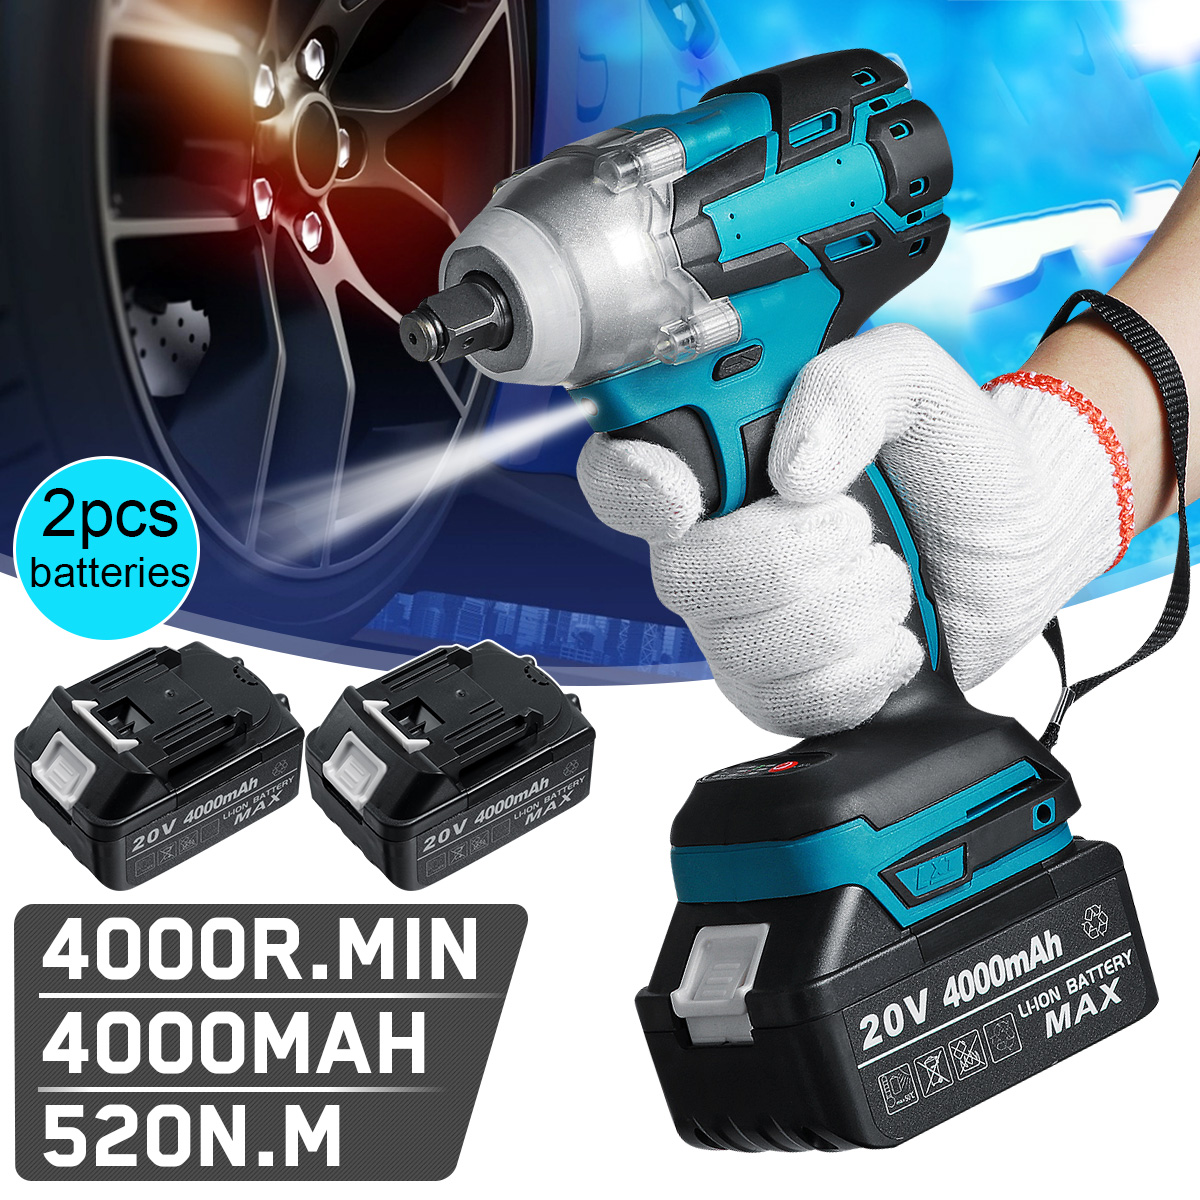 100-240V-20V-520Nm-4000RPM-Brushless-Electric-Impact-Wrench-Cordless-12quot-Power-Tool-For-Makita-Ba-1805406-1